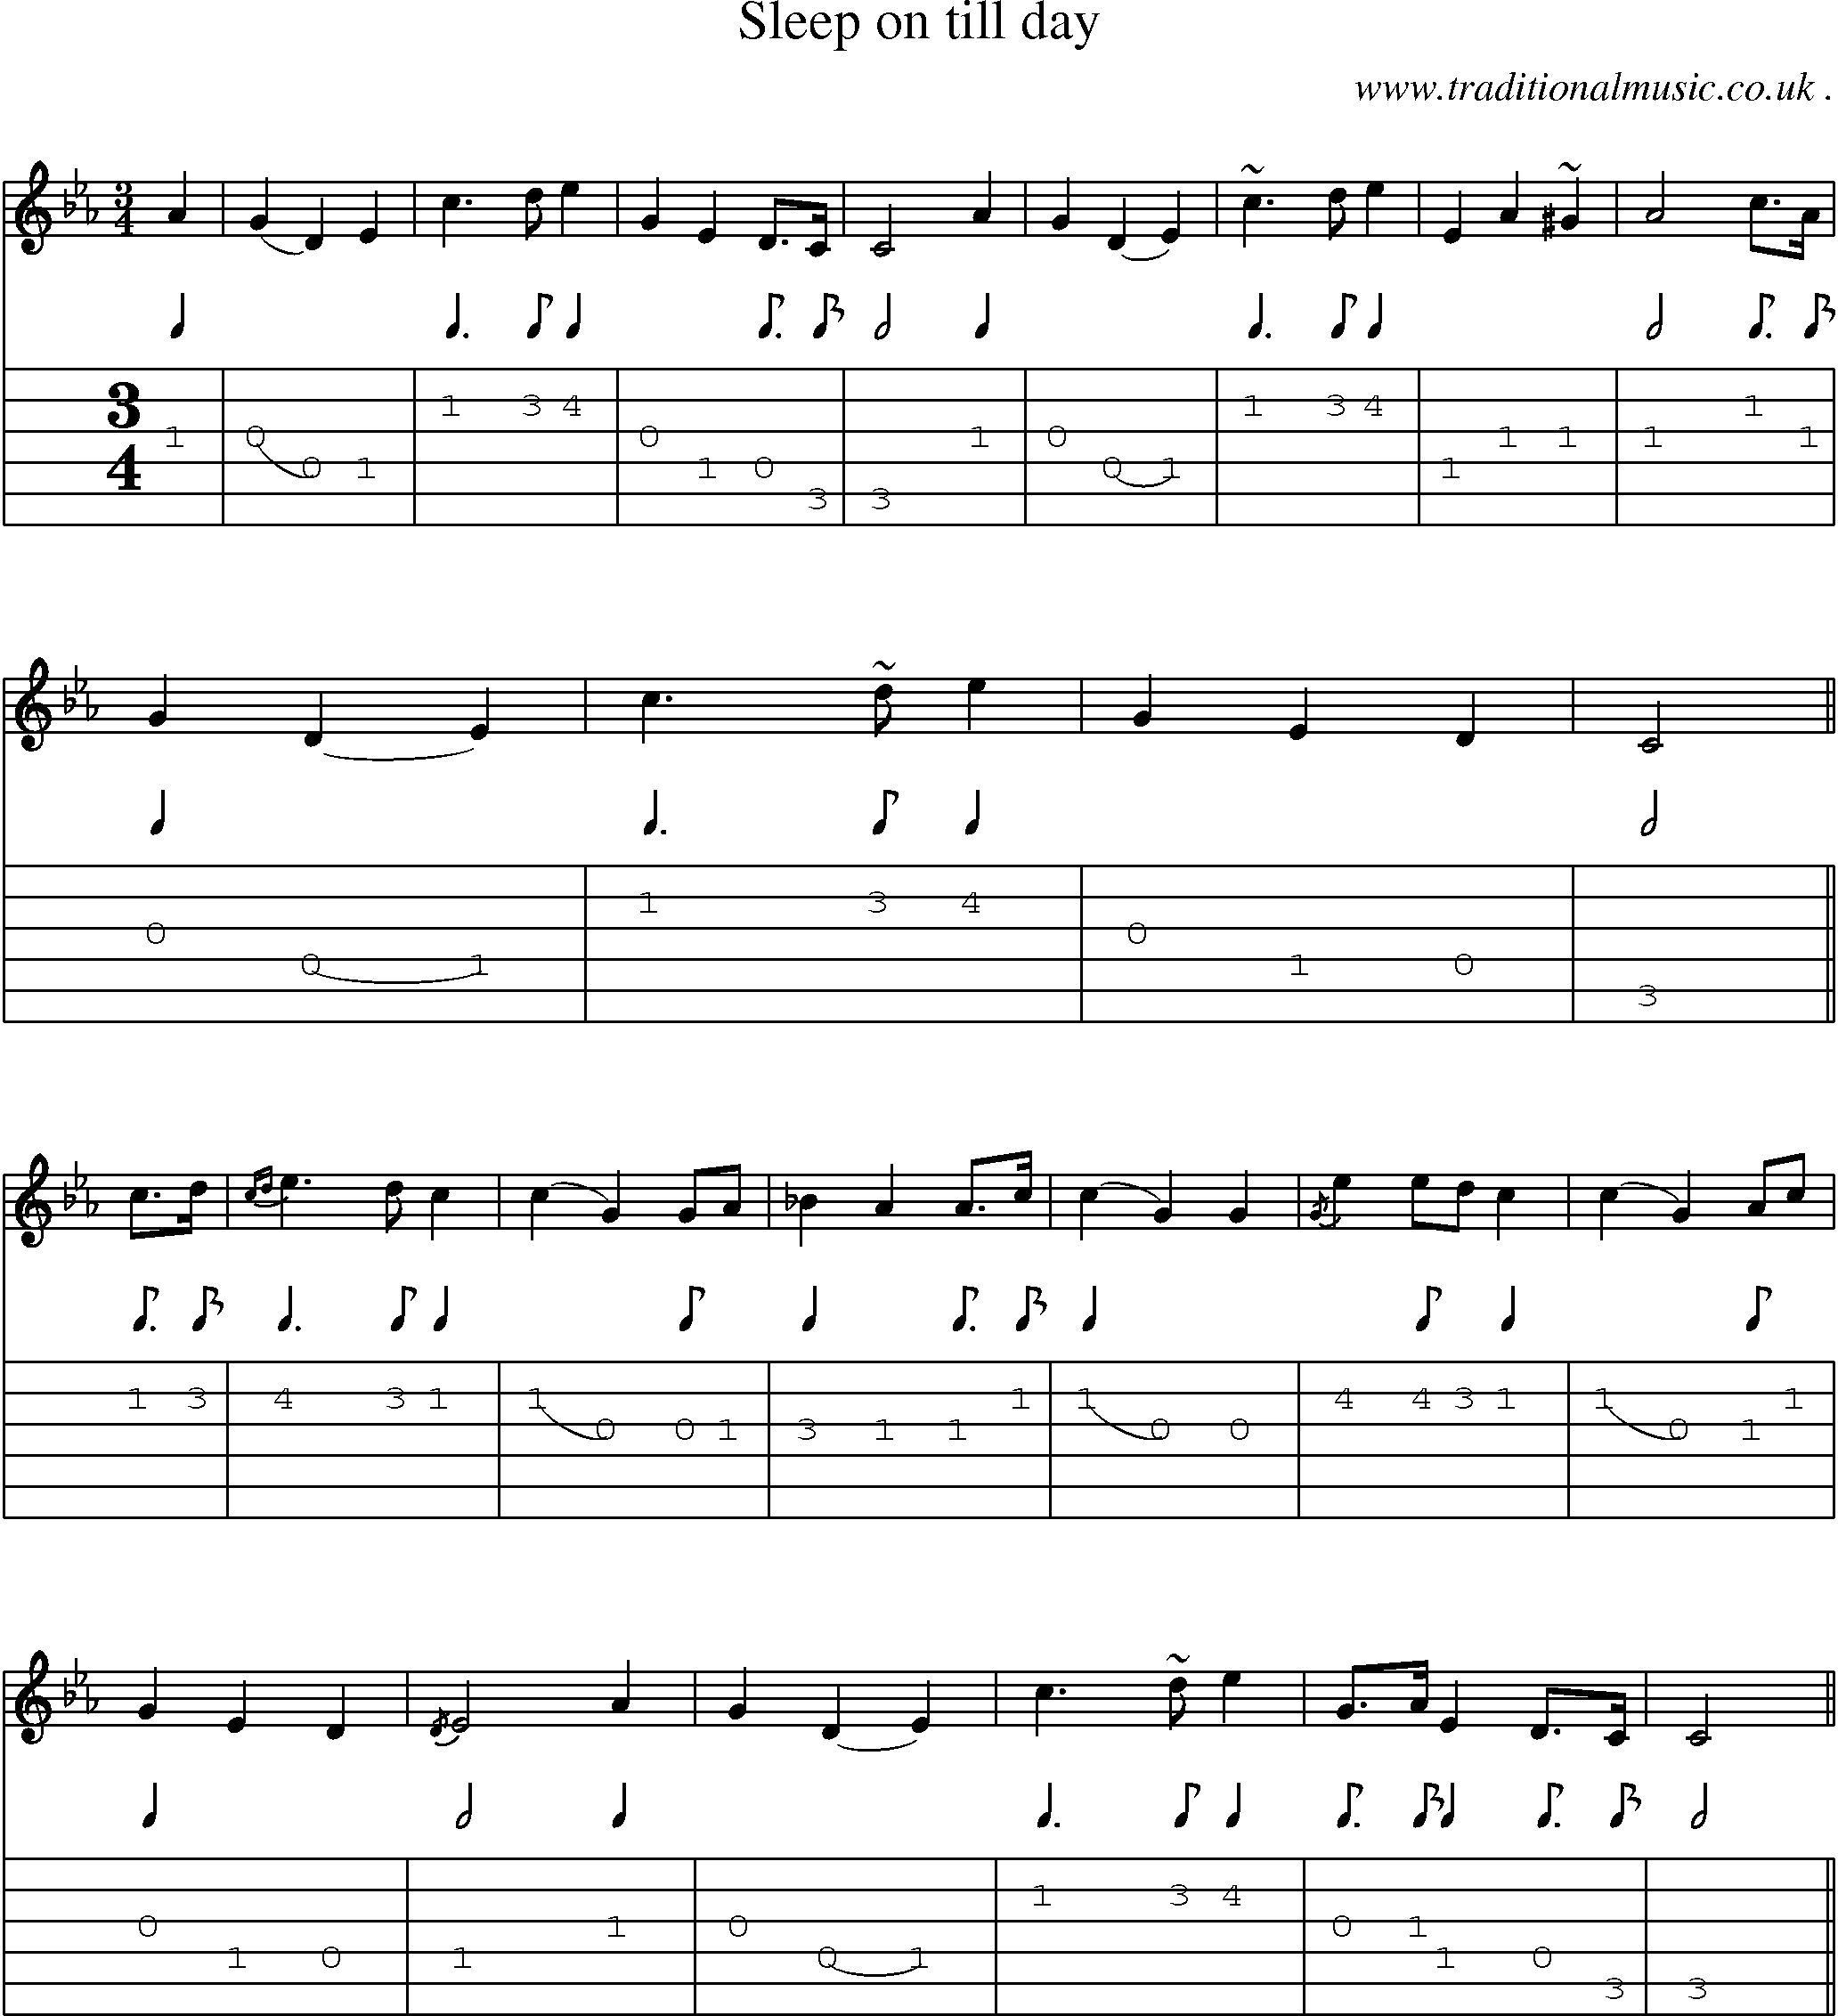 Sheet-music  score, Chords and Guitar Tabs for Sleep On Till Day